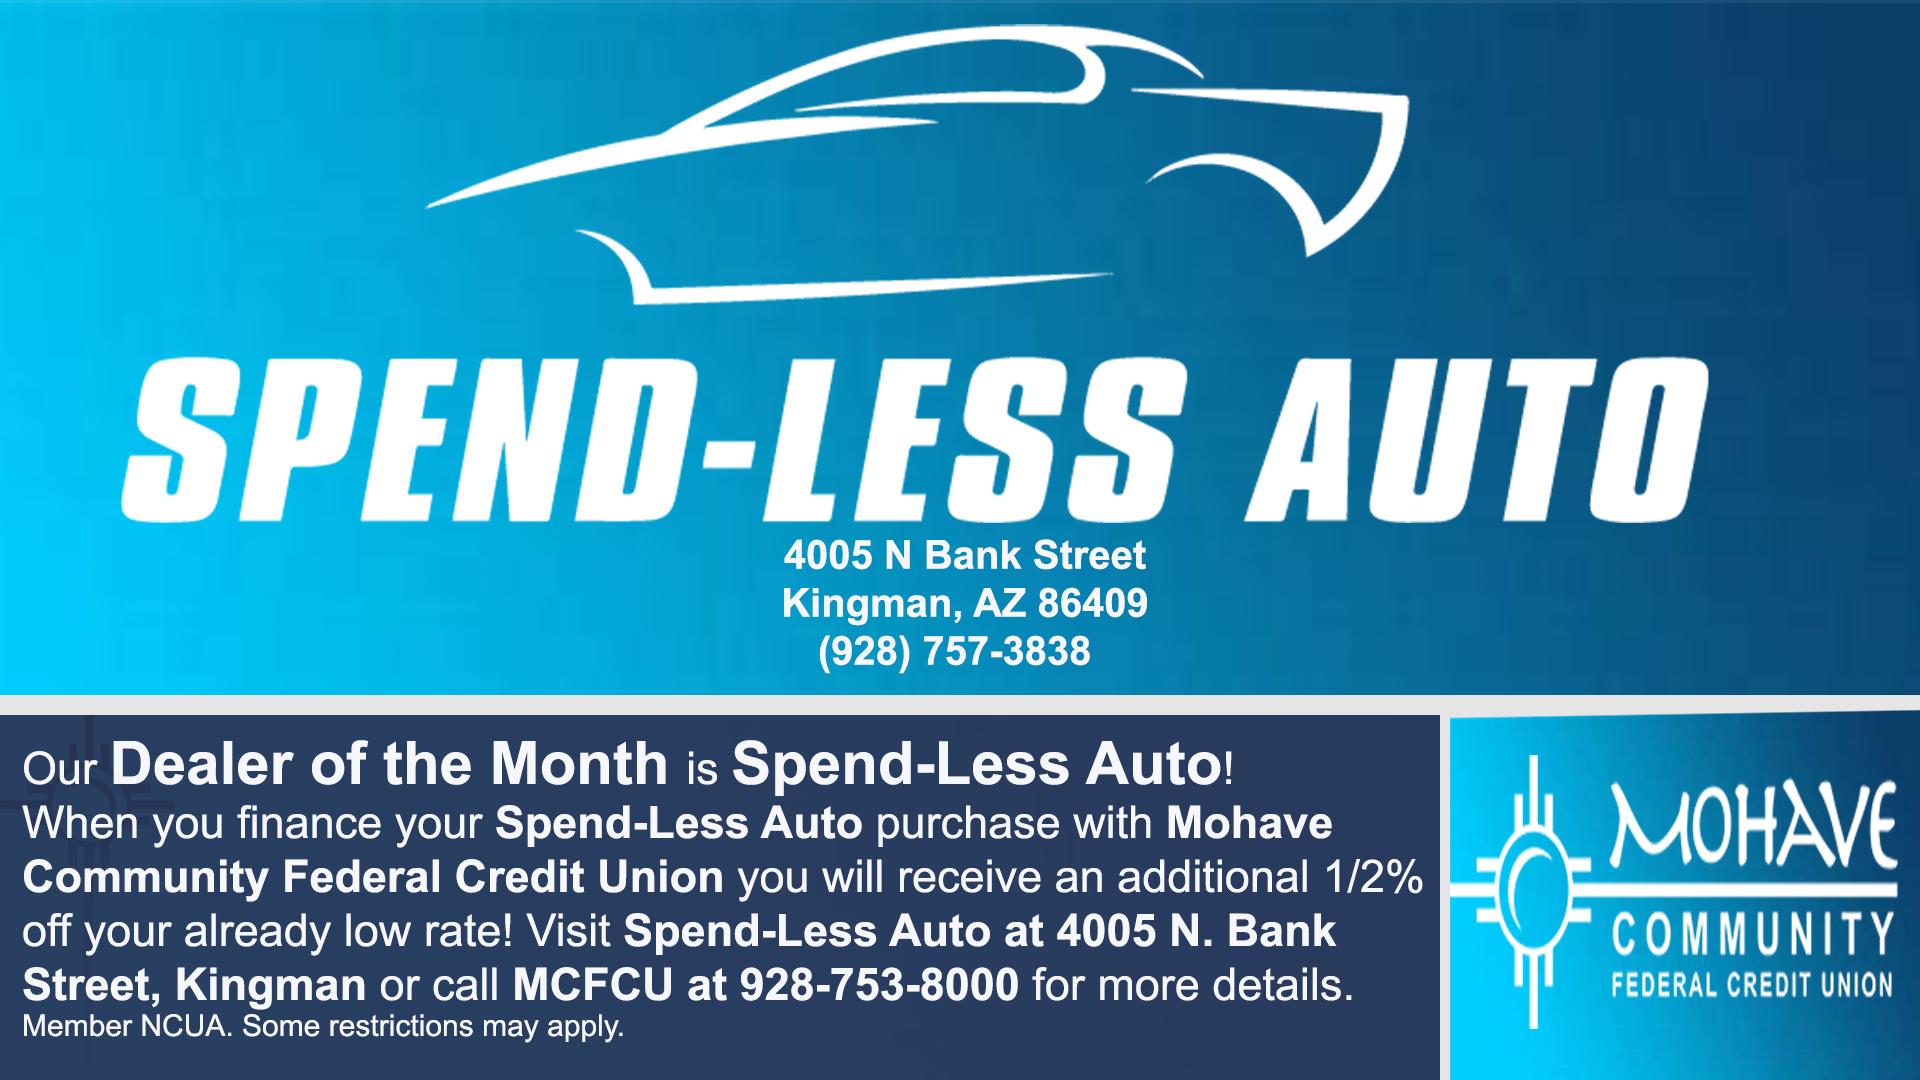 Spendless Auto is our Auto Dealer of the Month of September! When you finance your Spendless Auto purchase with MCFCU, you will receive an additional 1% off your already low APR(Annual Percentage Rate). All loans and interest rates are subject to credit approval. Some restrictions do apply. Contact us today at 928-753-8000 for more details.